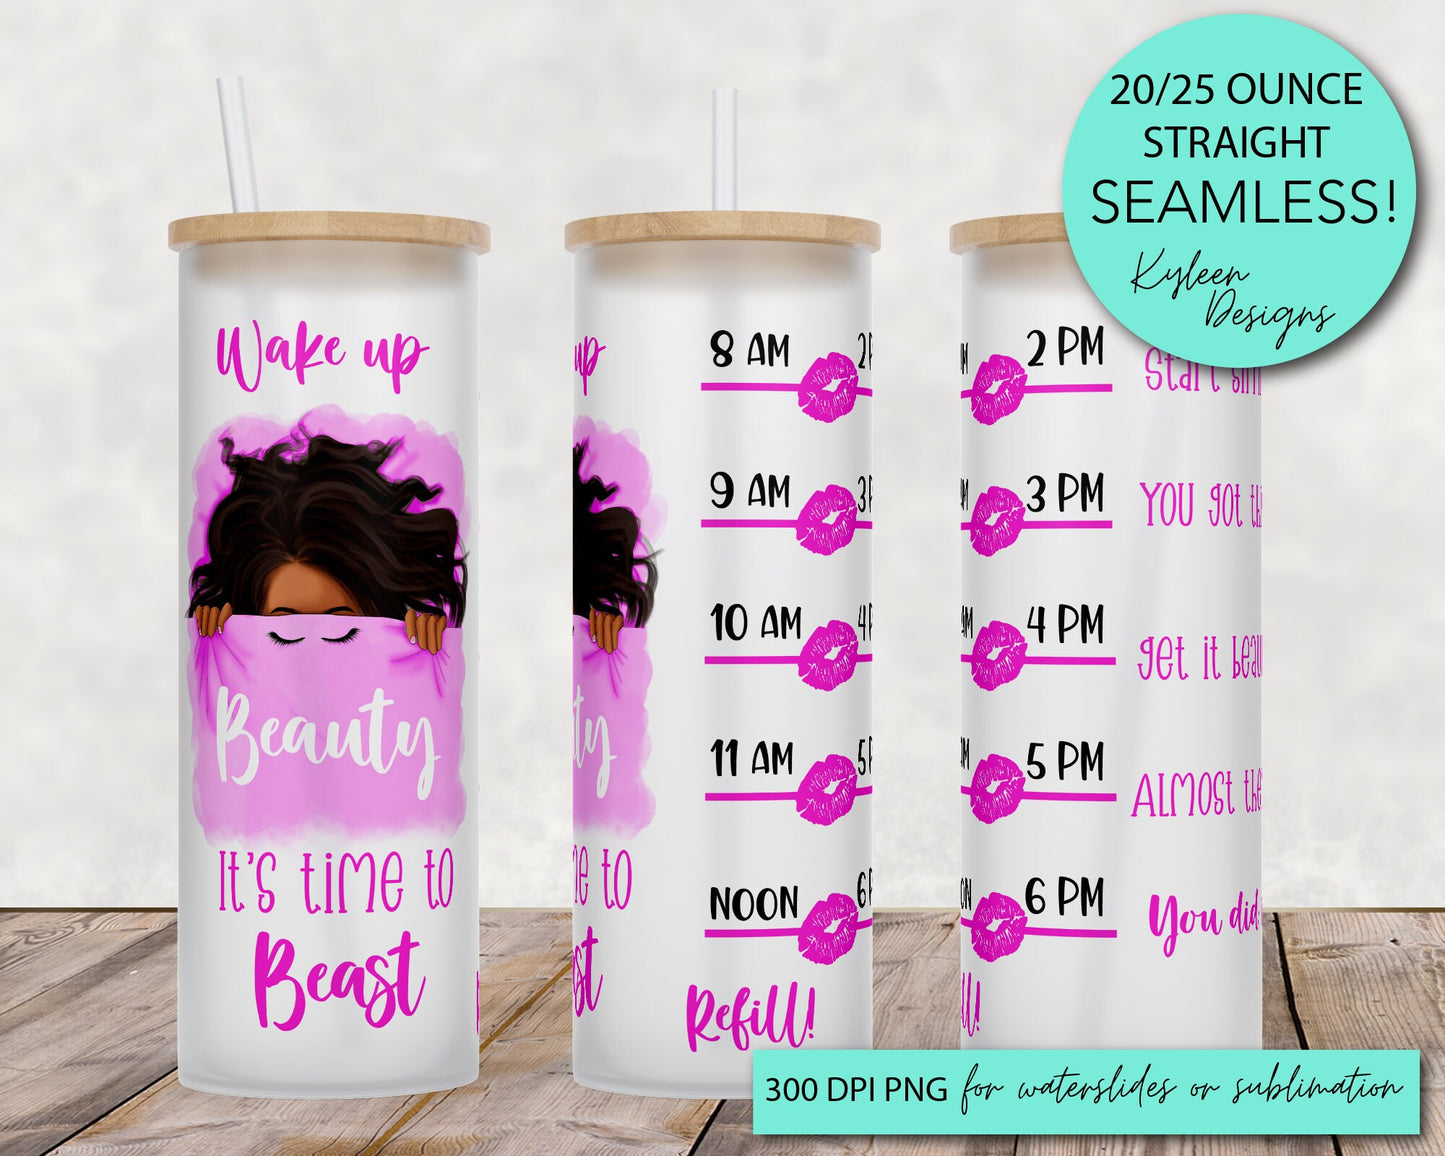 25 oz frosted glass tumbler png, wake up beauty its time to beast Tumbler template water tracker High res PNG digital file